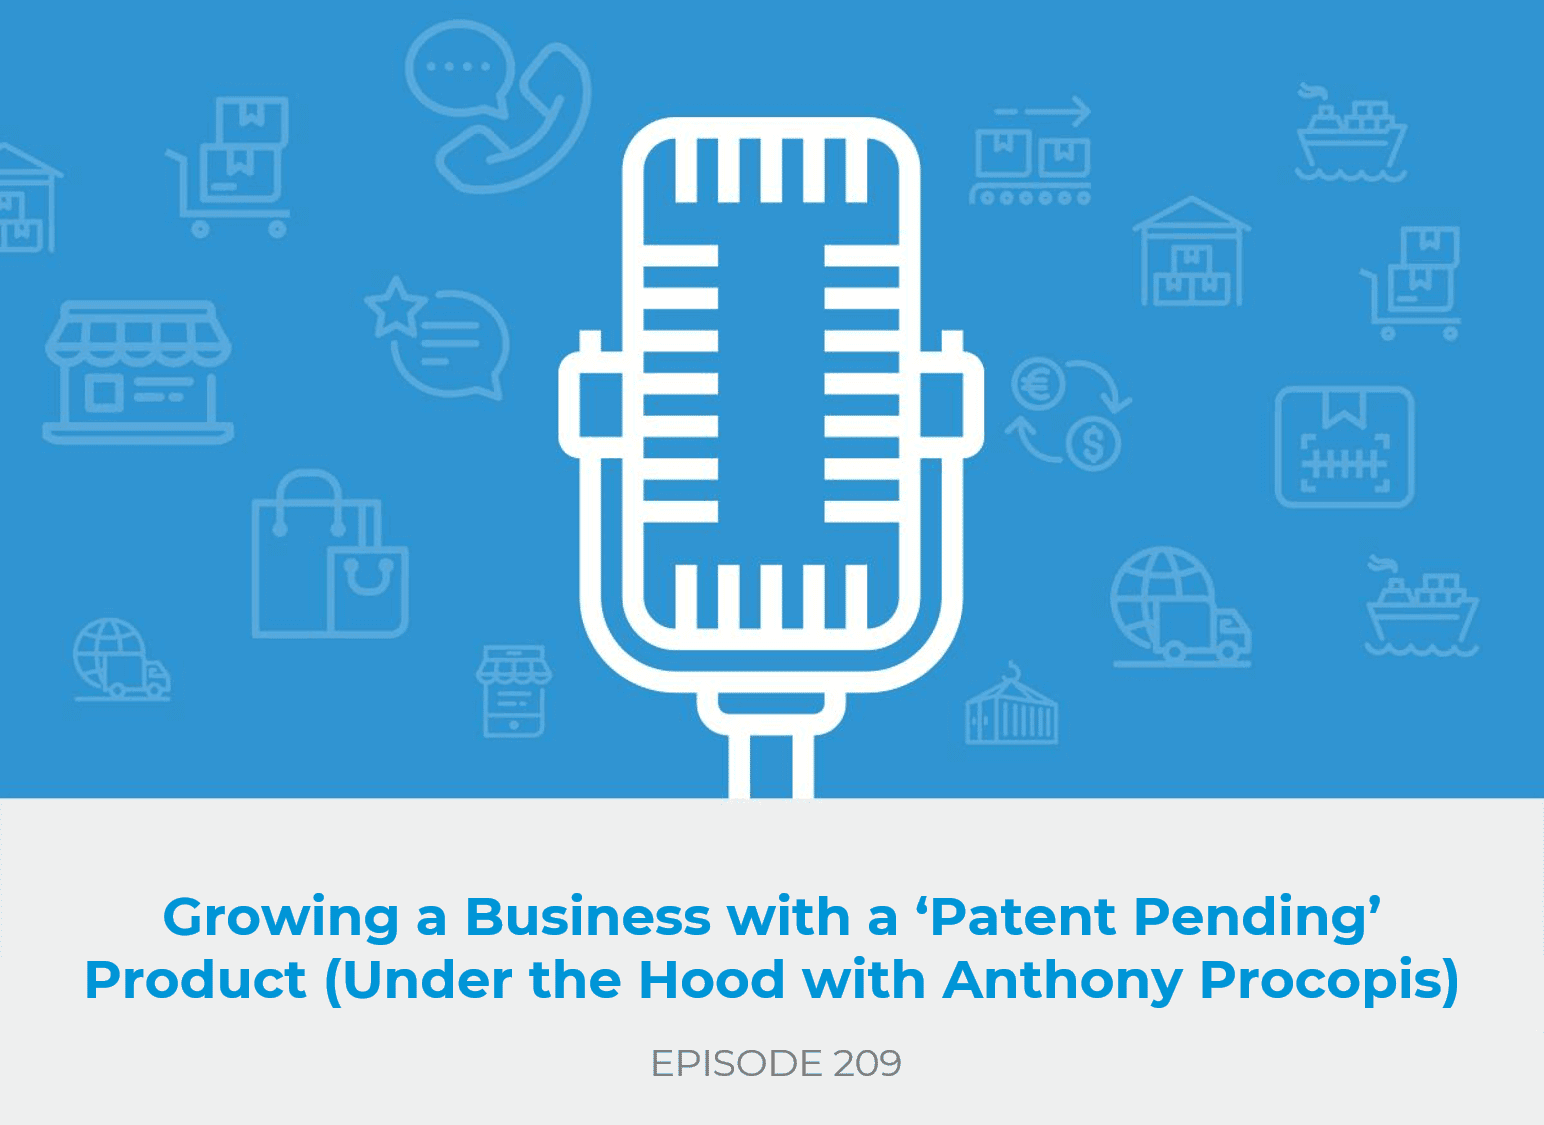 Growing a Business with a ‘Patent Pending’ Product (Under the Hood with Anthony Procopis)